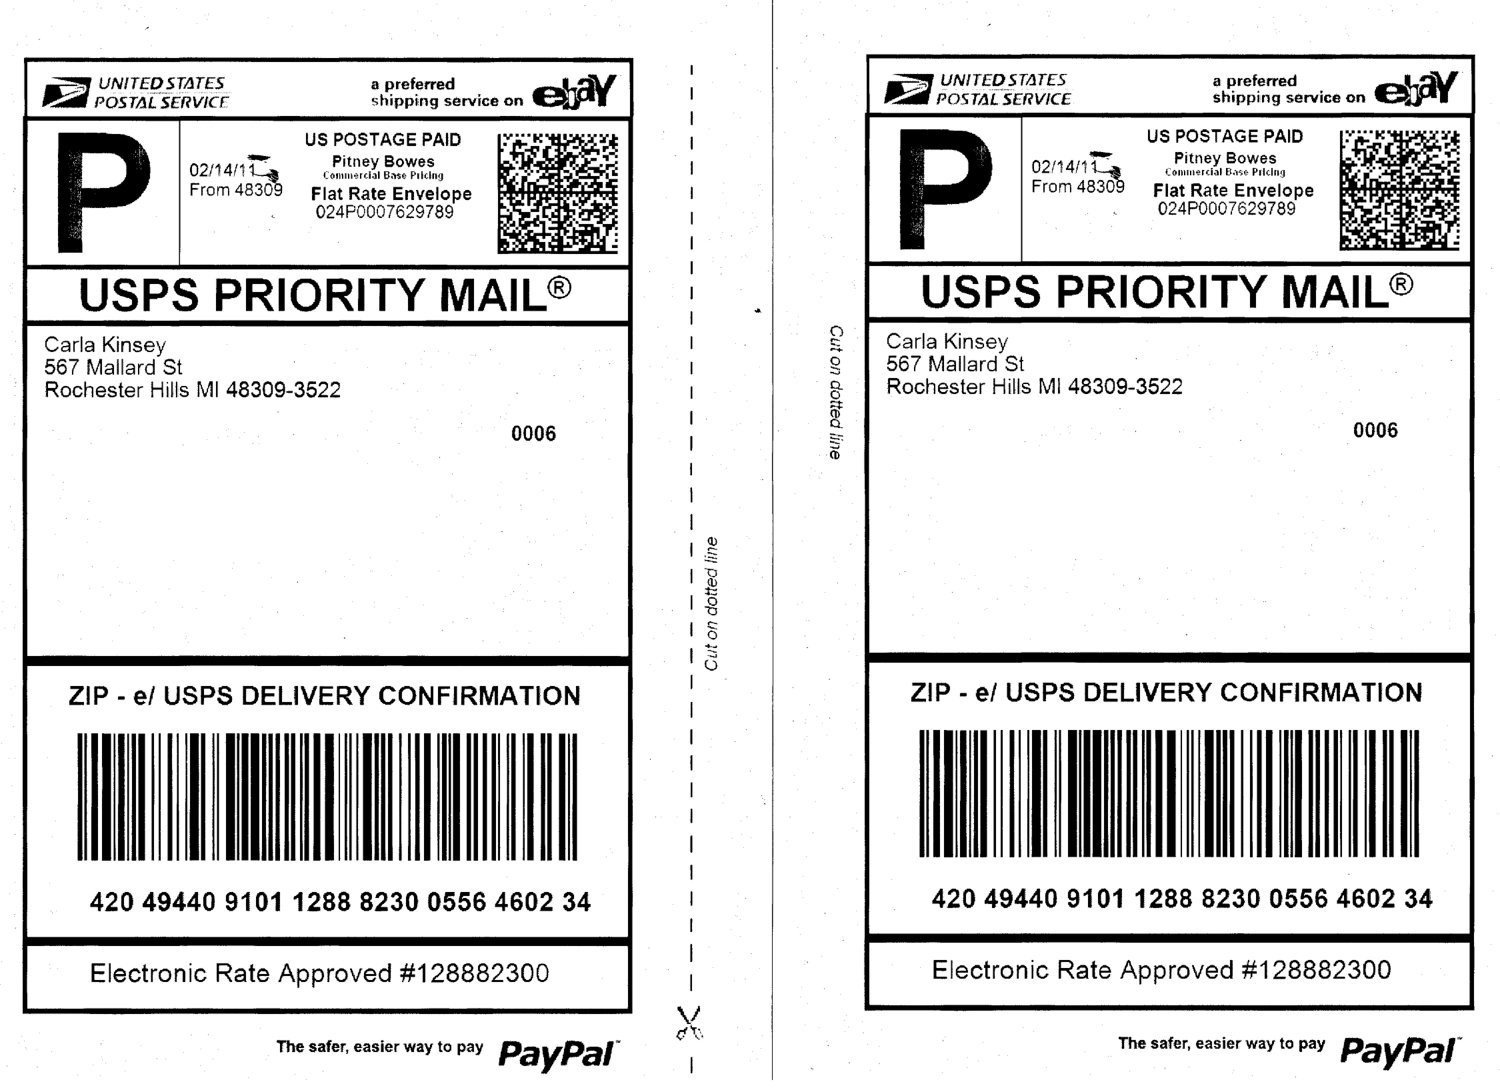 Shipping Label Template Usps